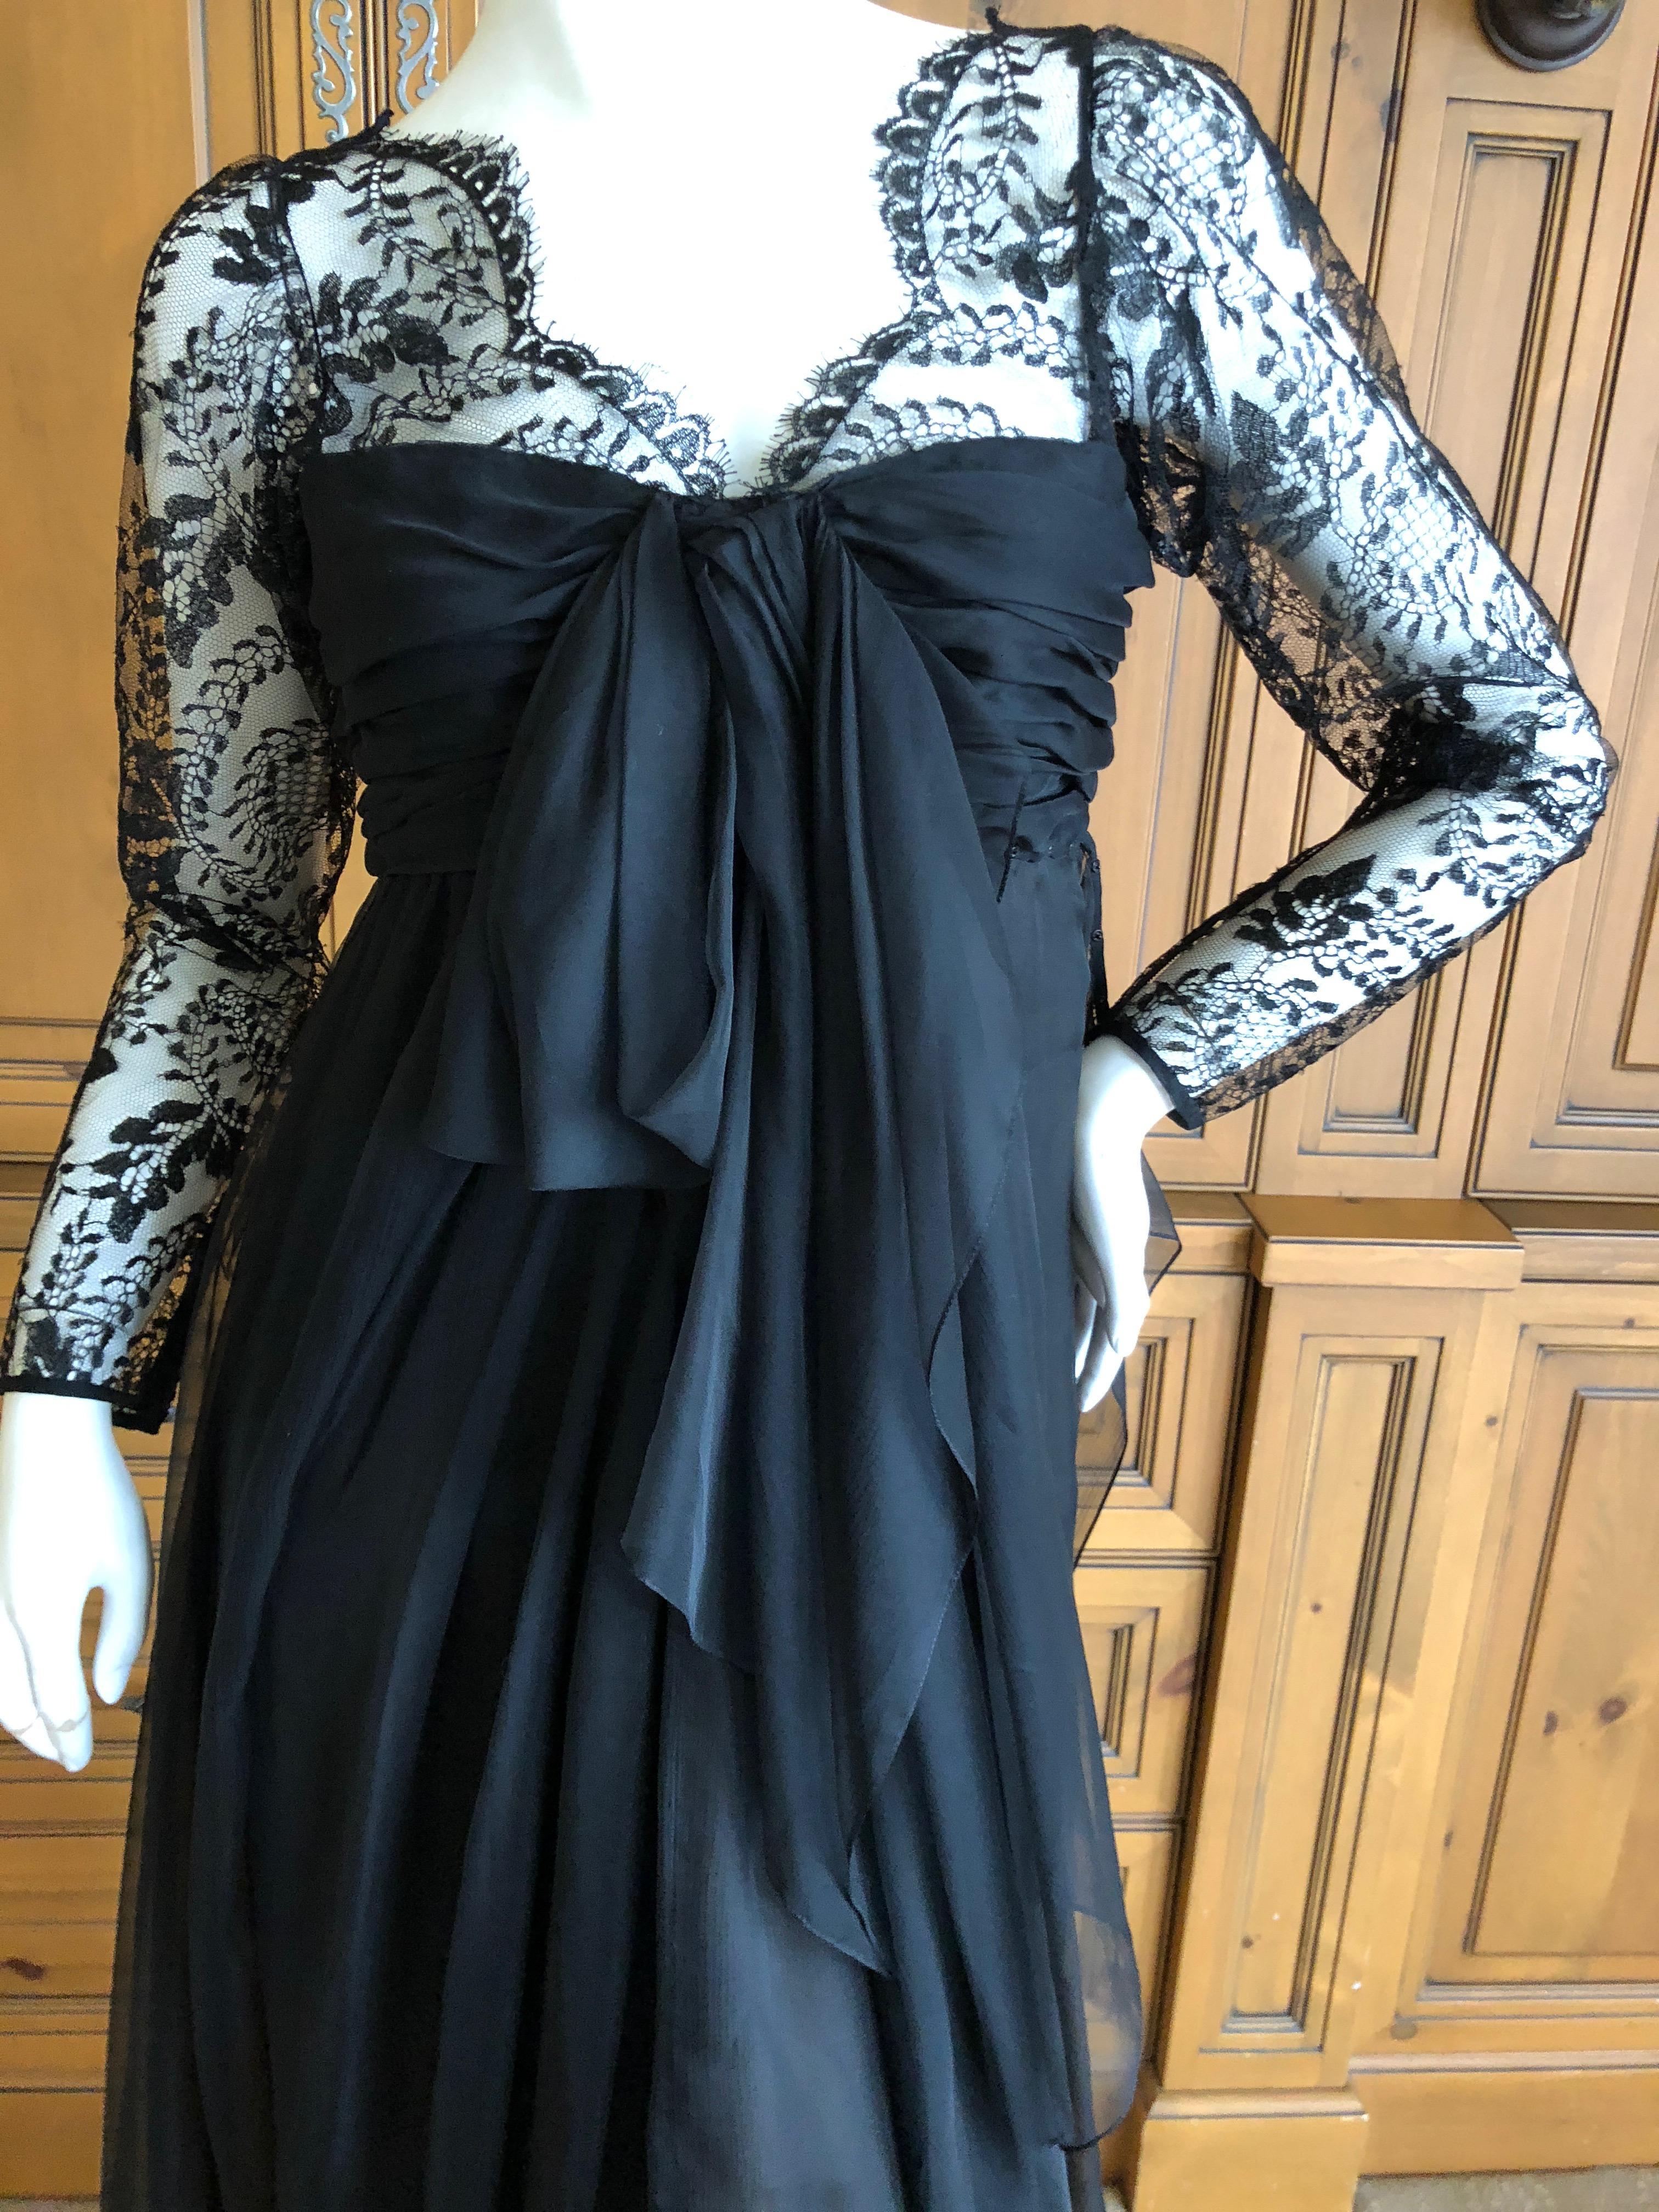 Yves Saint Laurent Numbered Haute Couture 1970's Black Lace Flou Evening Dress In Excellent Condition For Sale In Cloverdale, CA